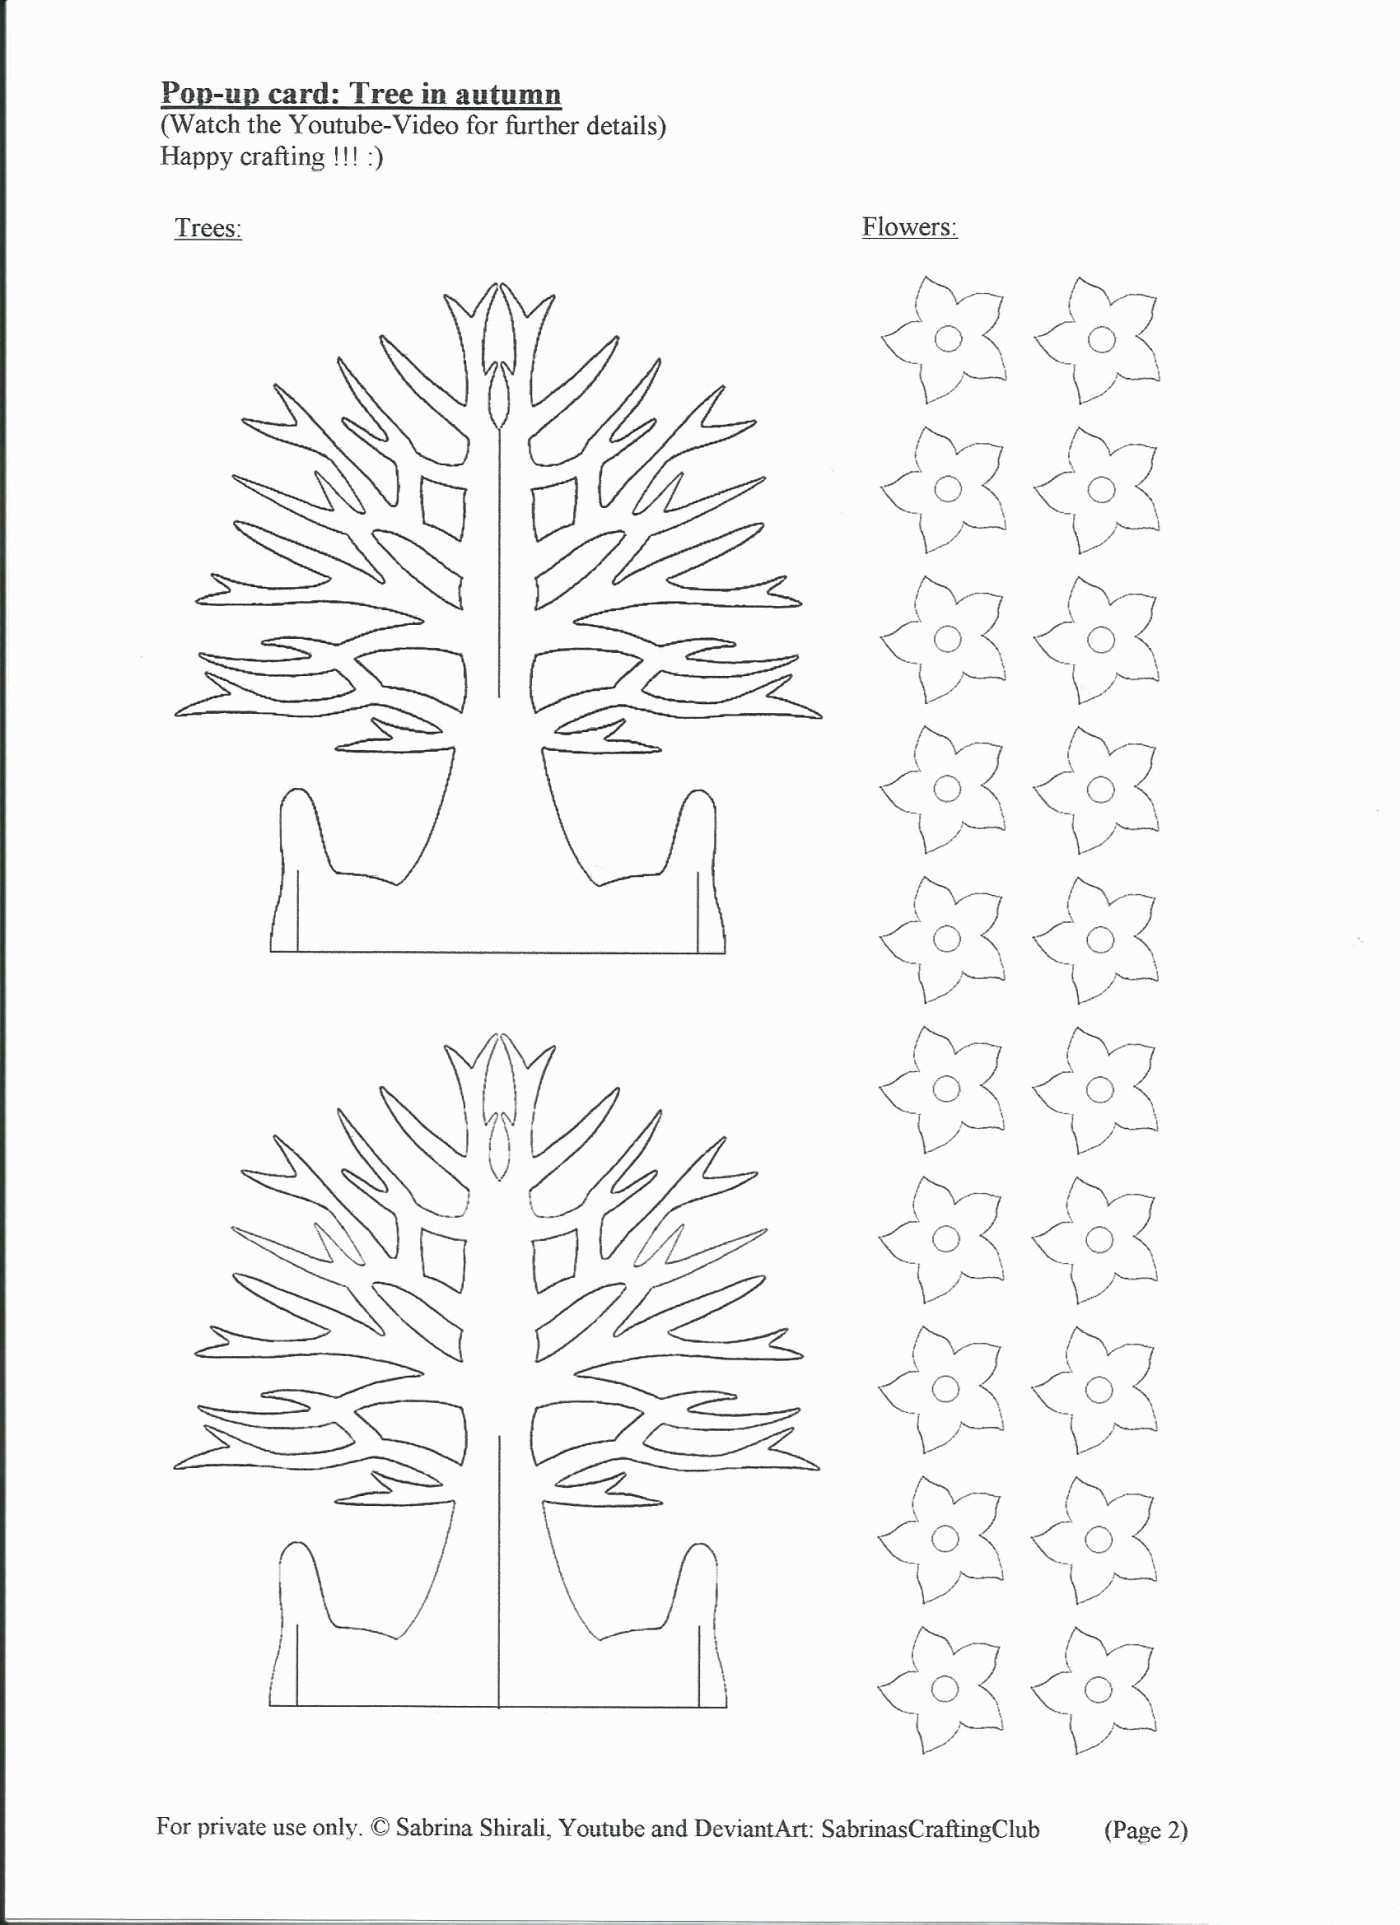 72 Free Printable Pop Up Card Templates Tree For Freepop Pertaining To Free Pop Up Card Templates Download